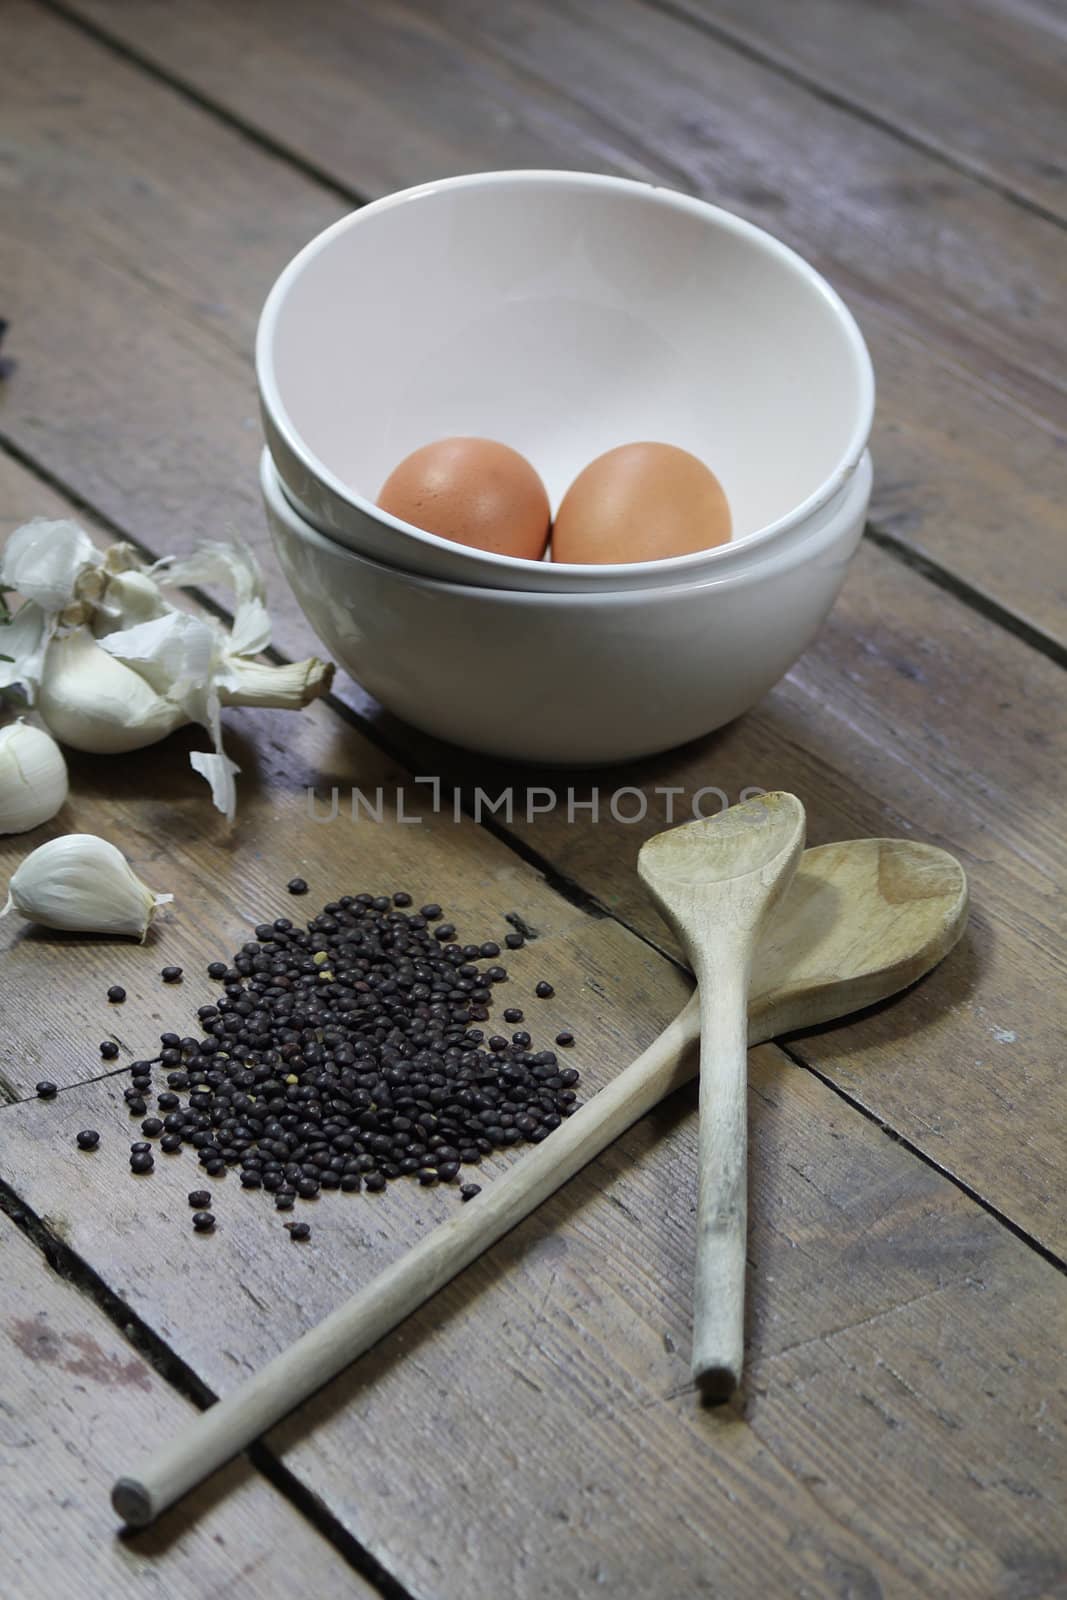 Kitchen ingredients comprising of brown eggs in a white bowl, garlic, fresh rosemary and black lentils. All set on a portrait format against a wooden background with two wooden spoons.